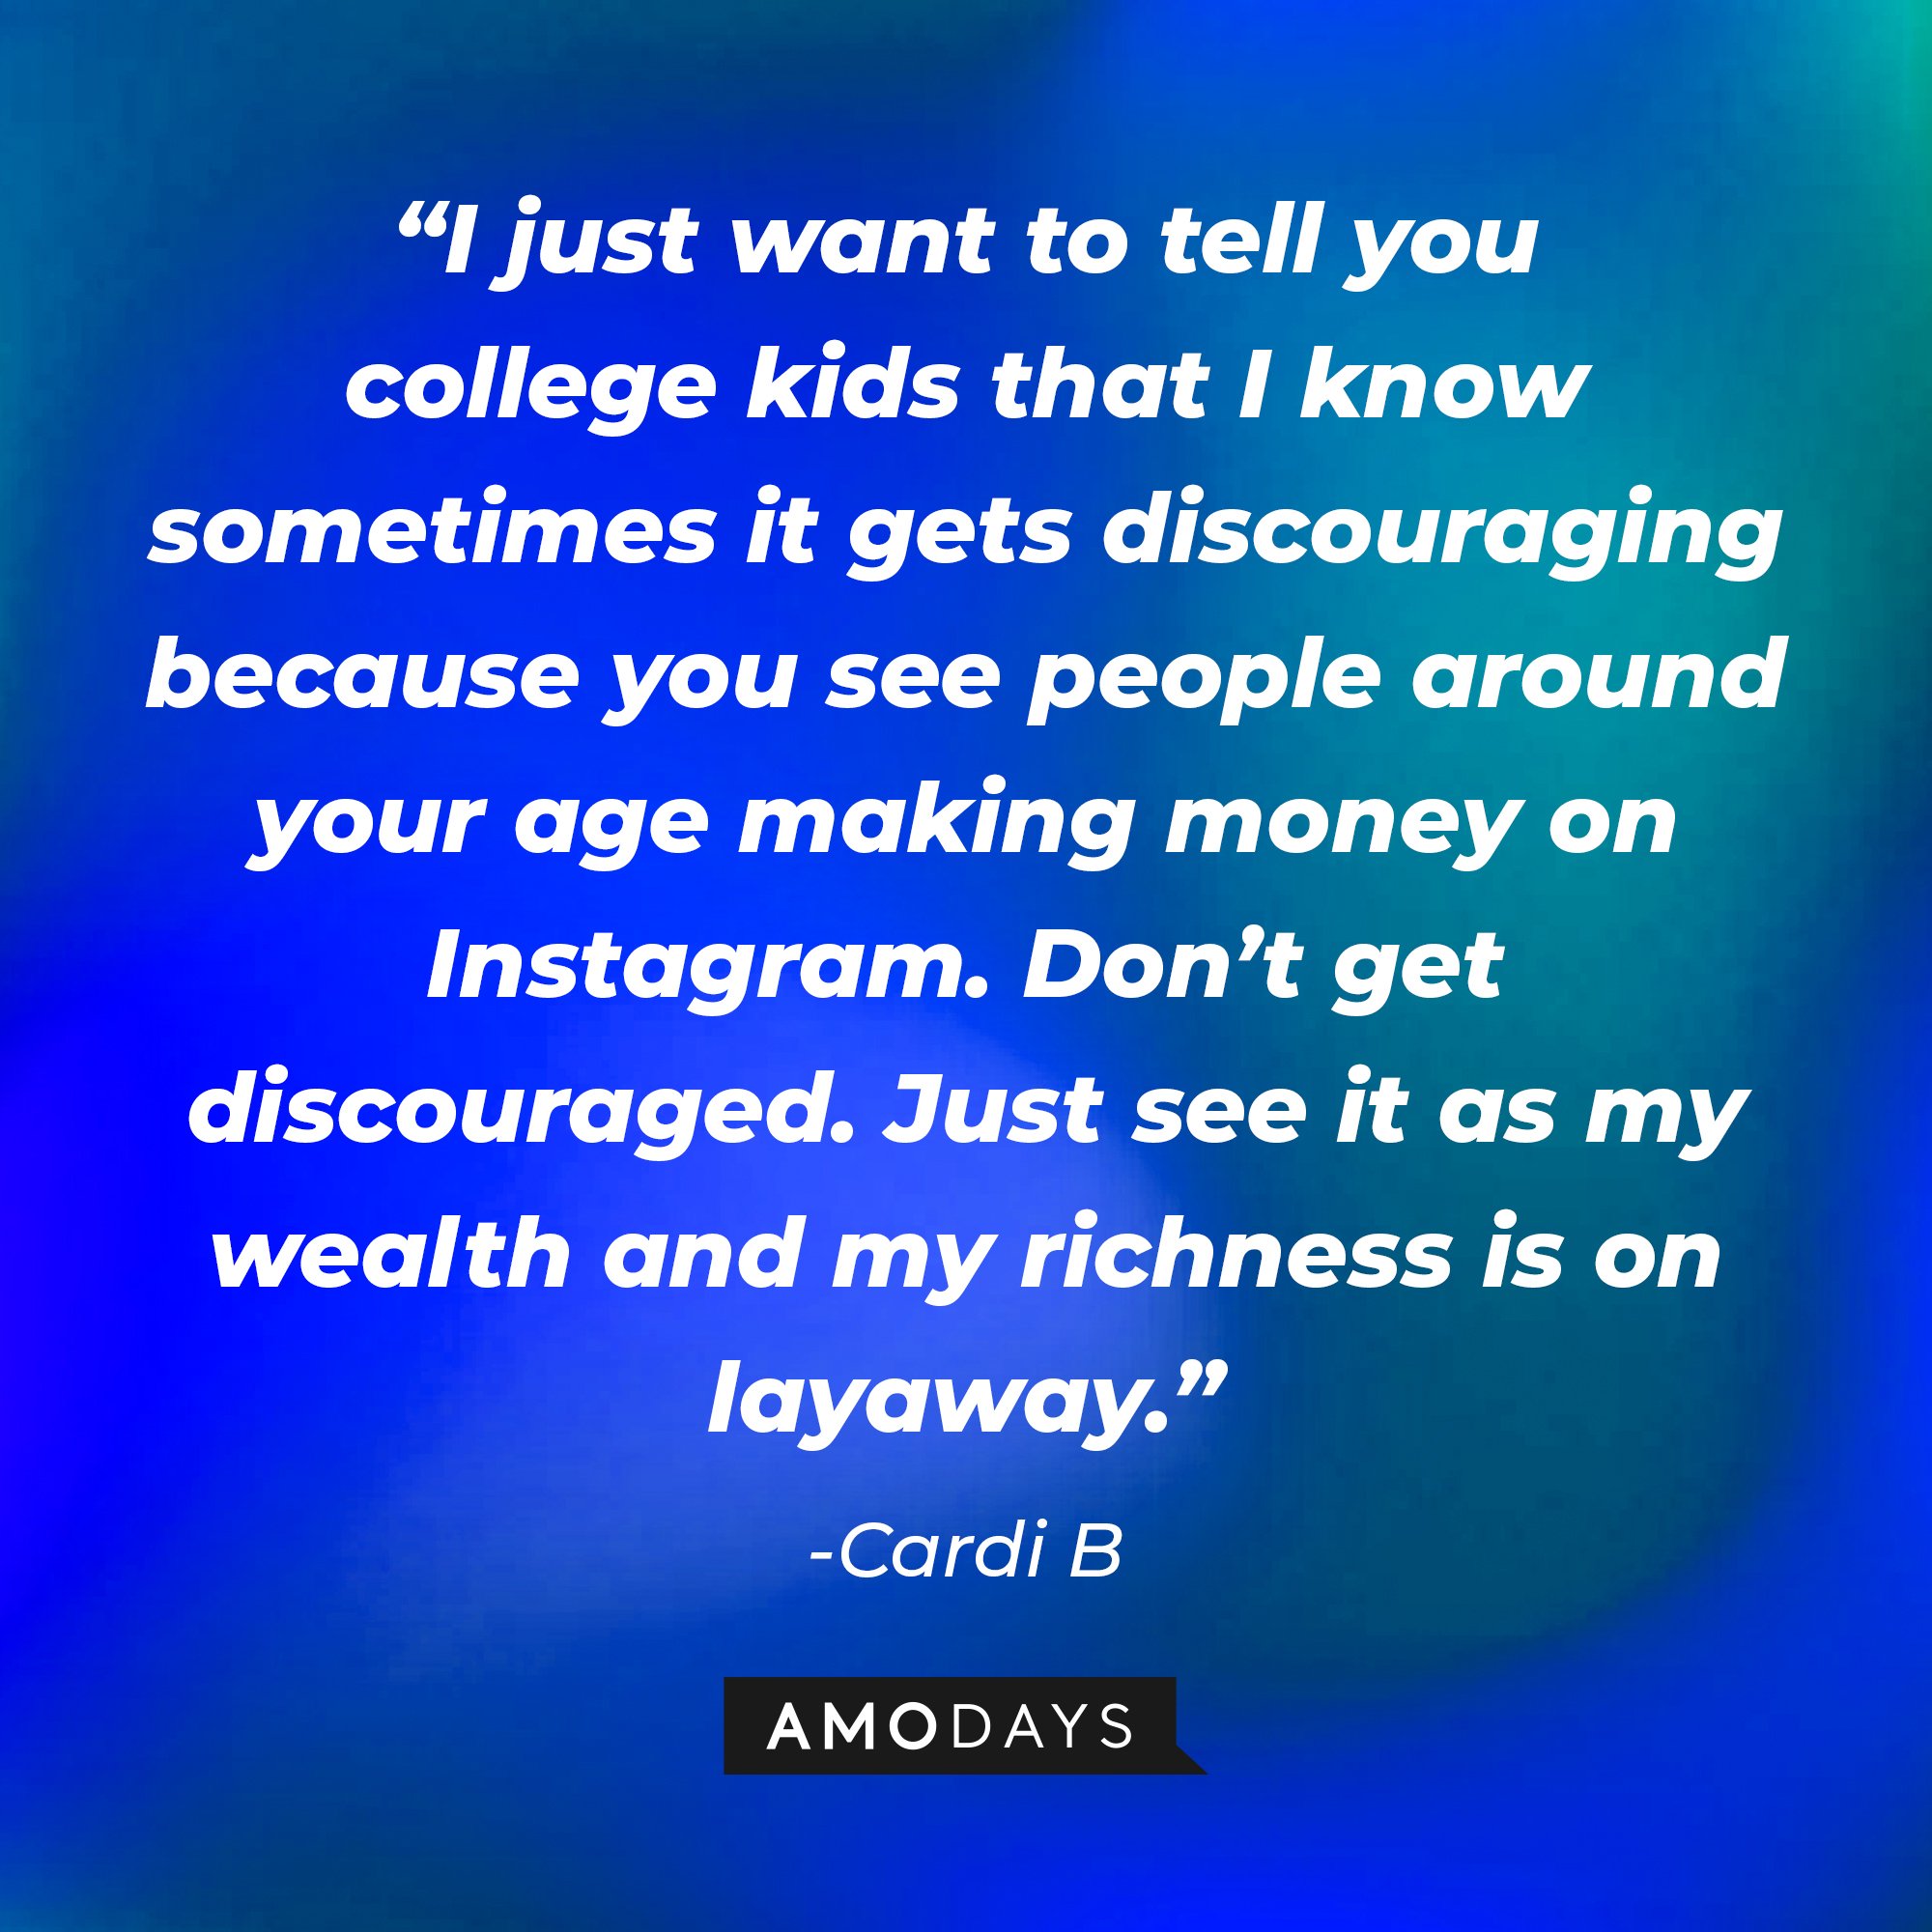 Cardi B's quotes: "I just want to tell you college kids that I know sometimes it gets discouraging because you see people around your age making money on Instagram. Don't get discouraged. Just see it as my wealth and my richness is on layaway." | Image: AmoDays